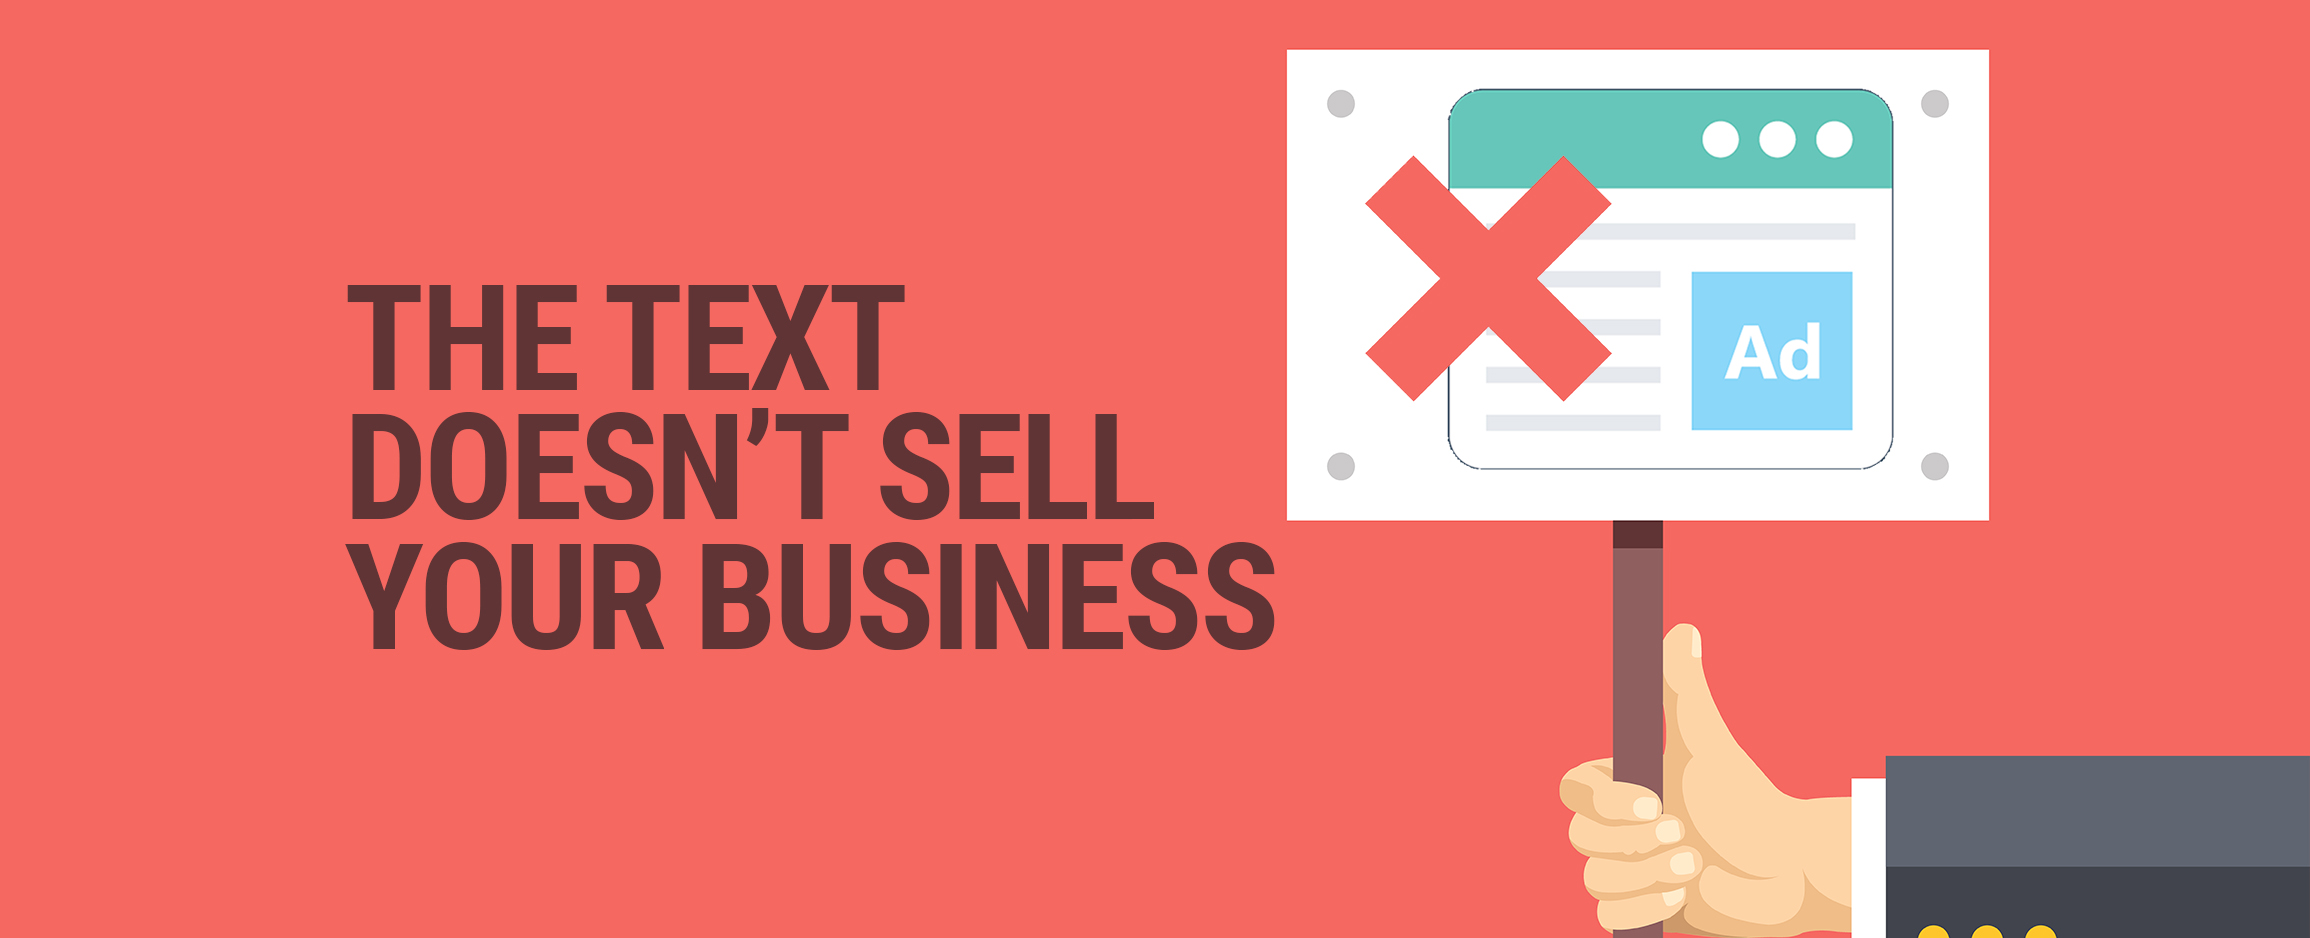 The Text Doesn’t Sell Your Business